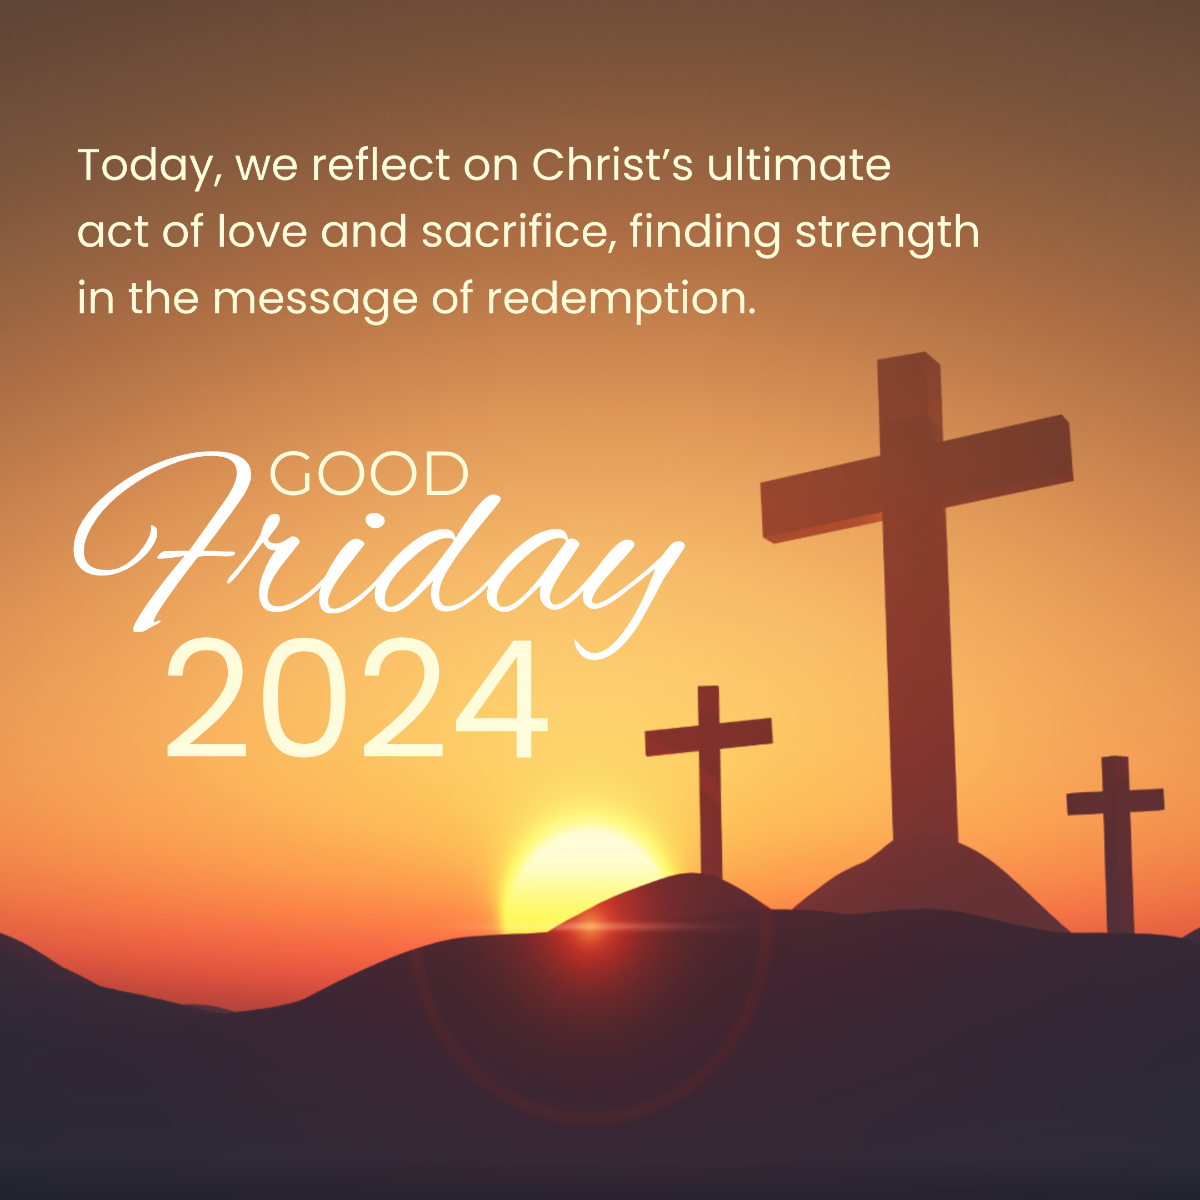 Good Friday 2024 Template